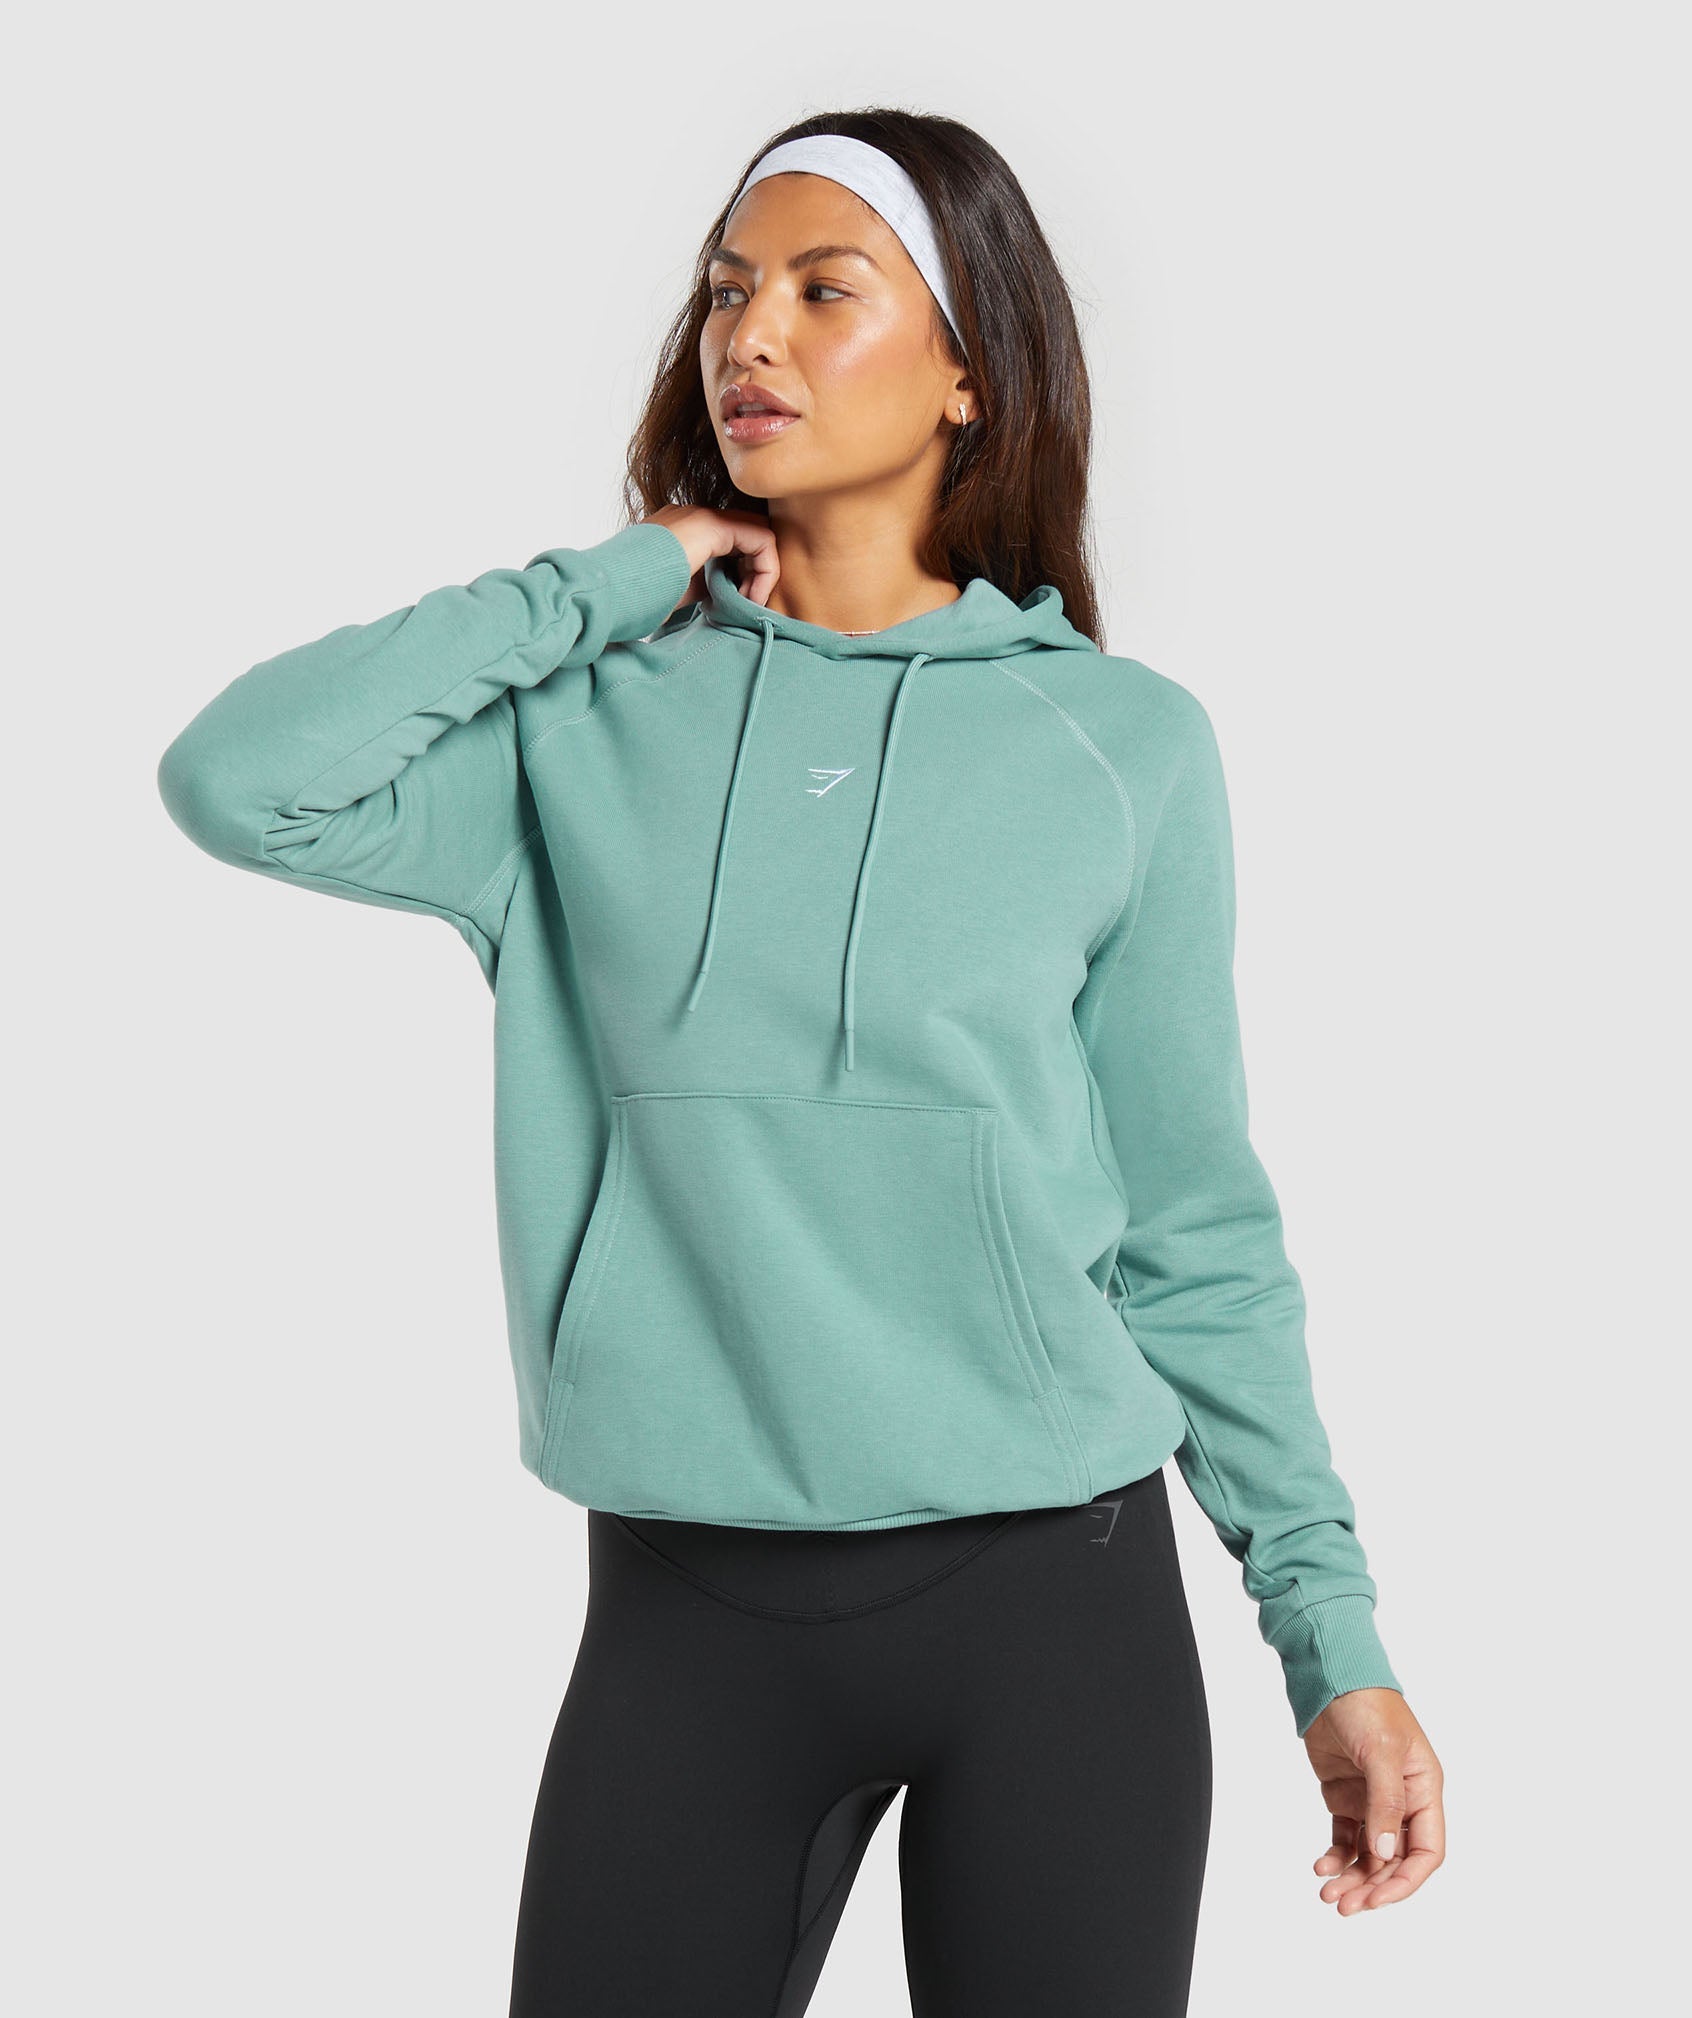 Training Hoodie in Duck Egg Blue - view 1